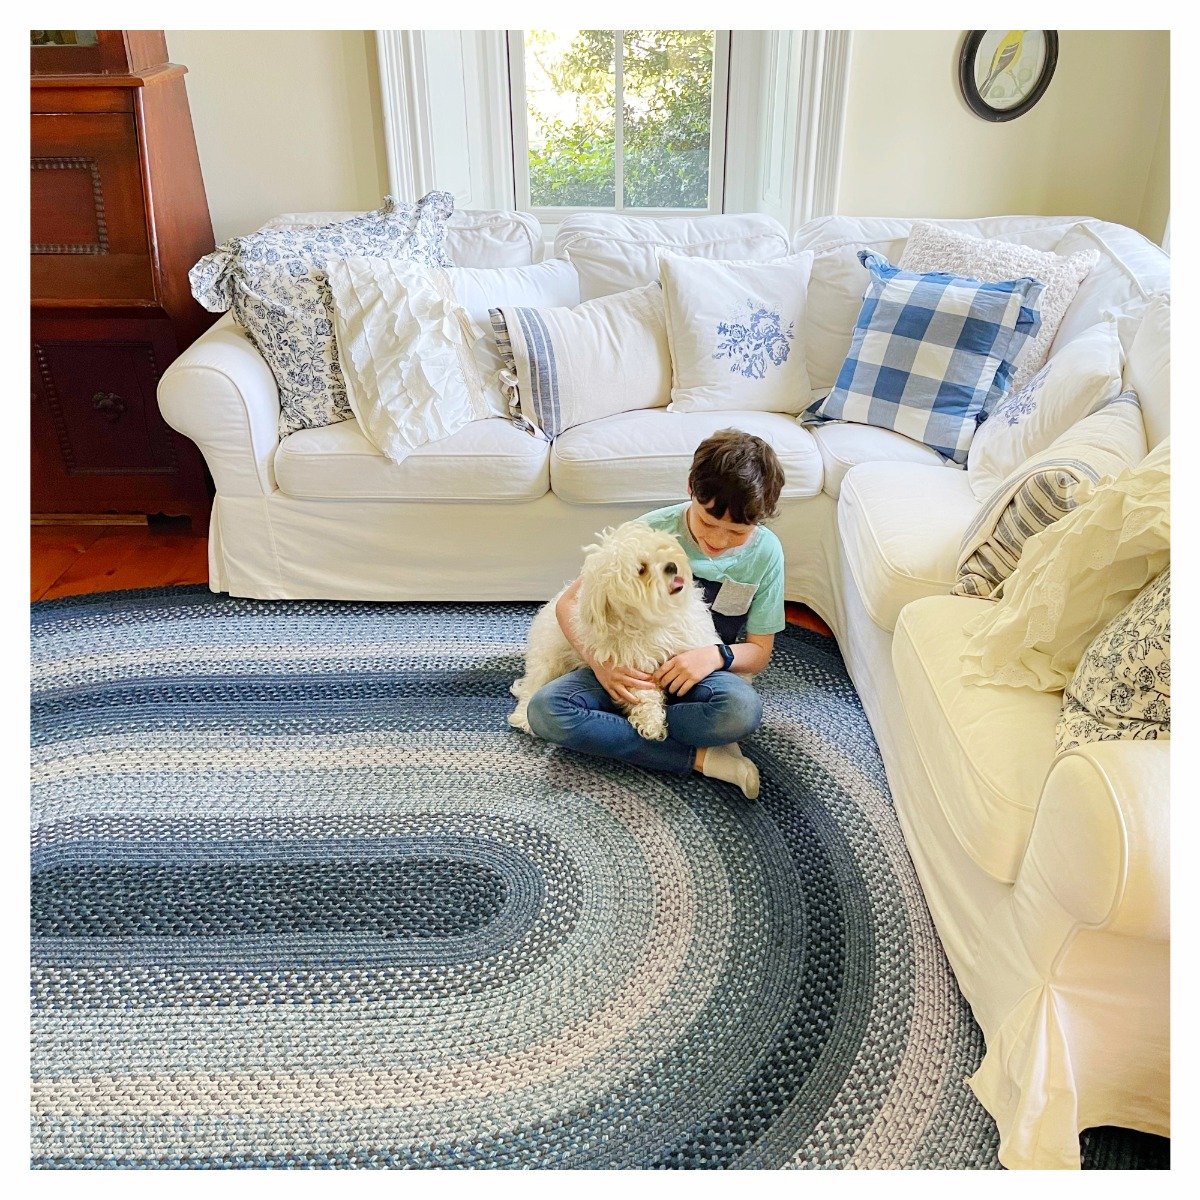 Braided Oval Rugs